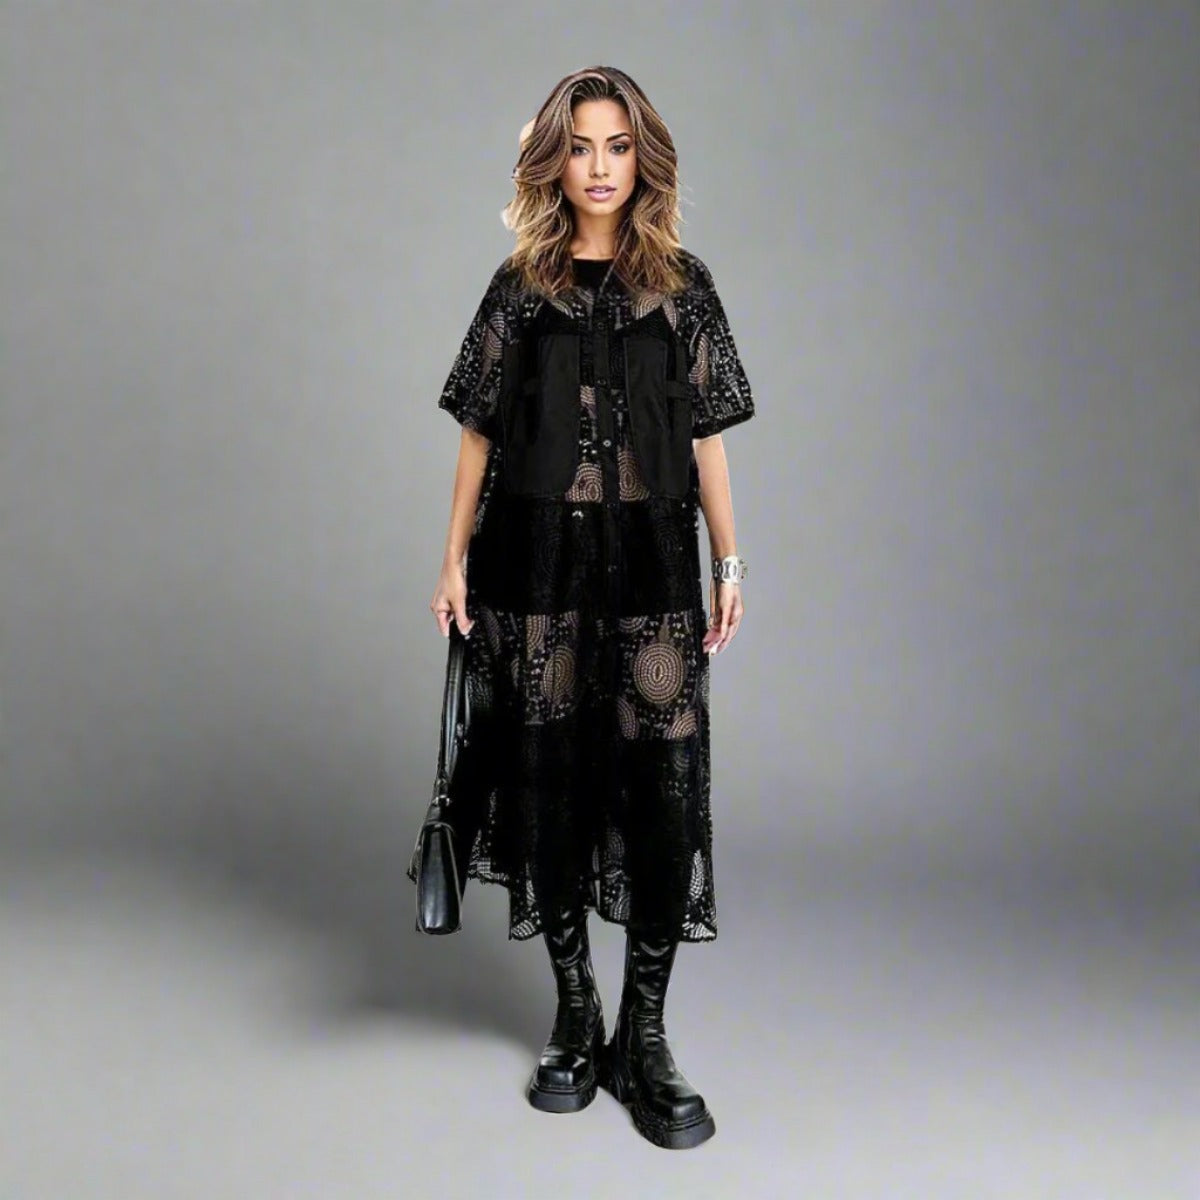 Gothic Style Black Lace See-Through Shirt Dress with Button Closure-SimpleModerne